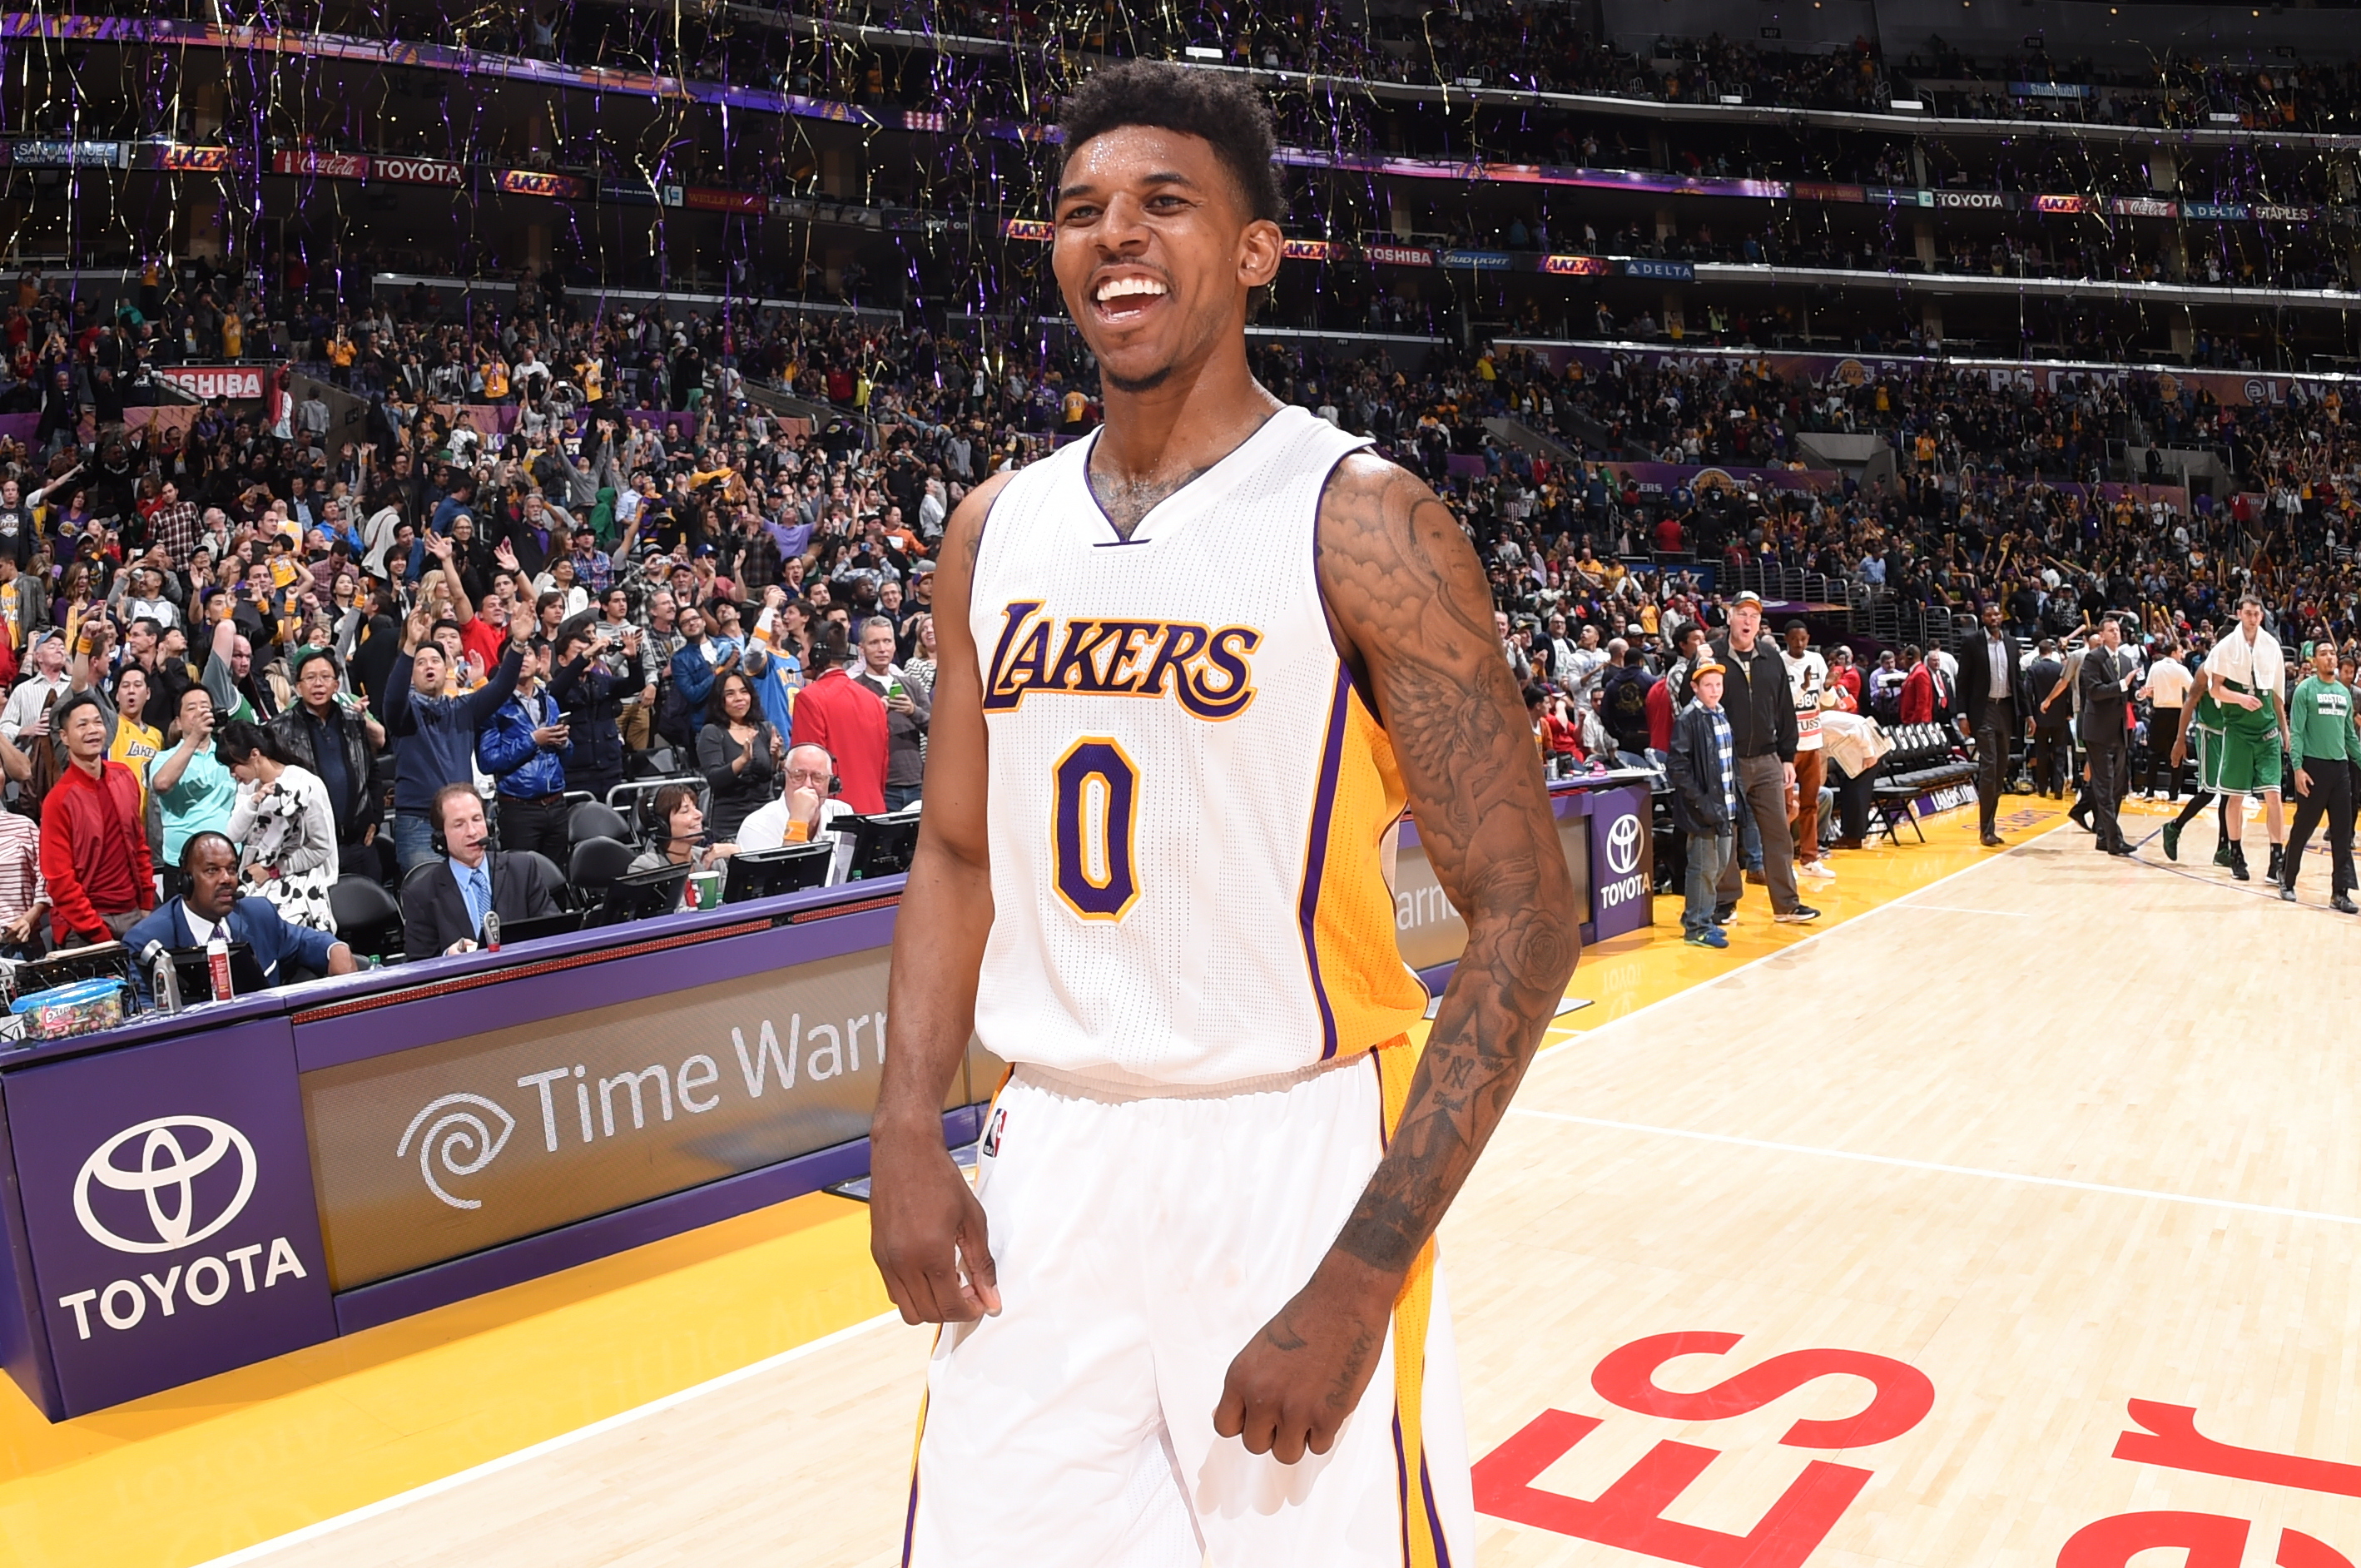 Lakers' Nick Young blames ejection on season-long frustration – Daily News